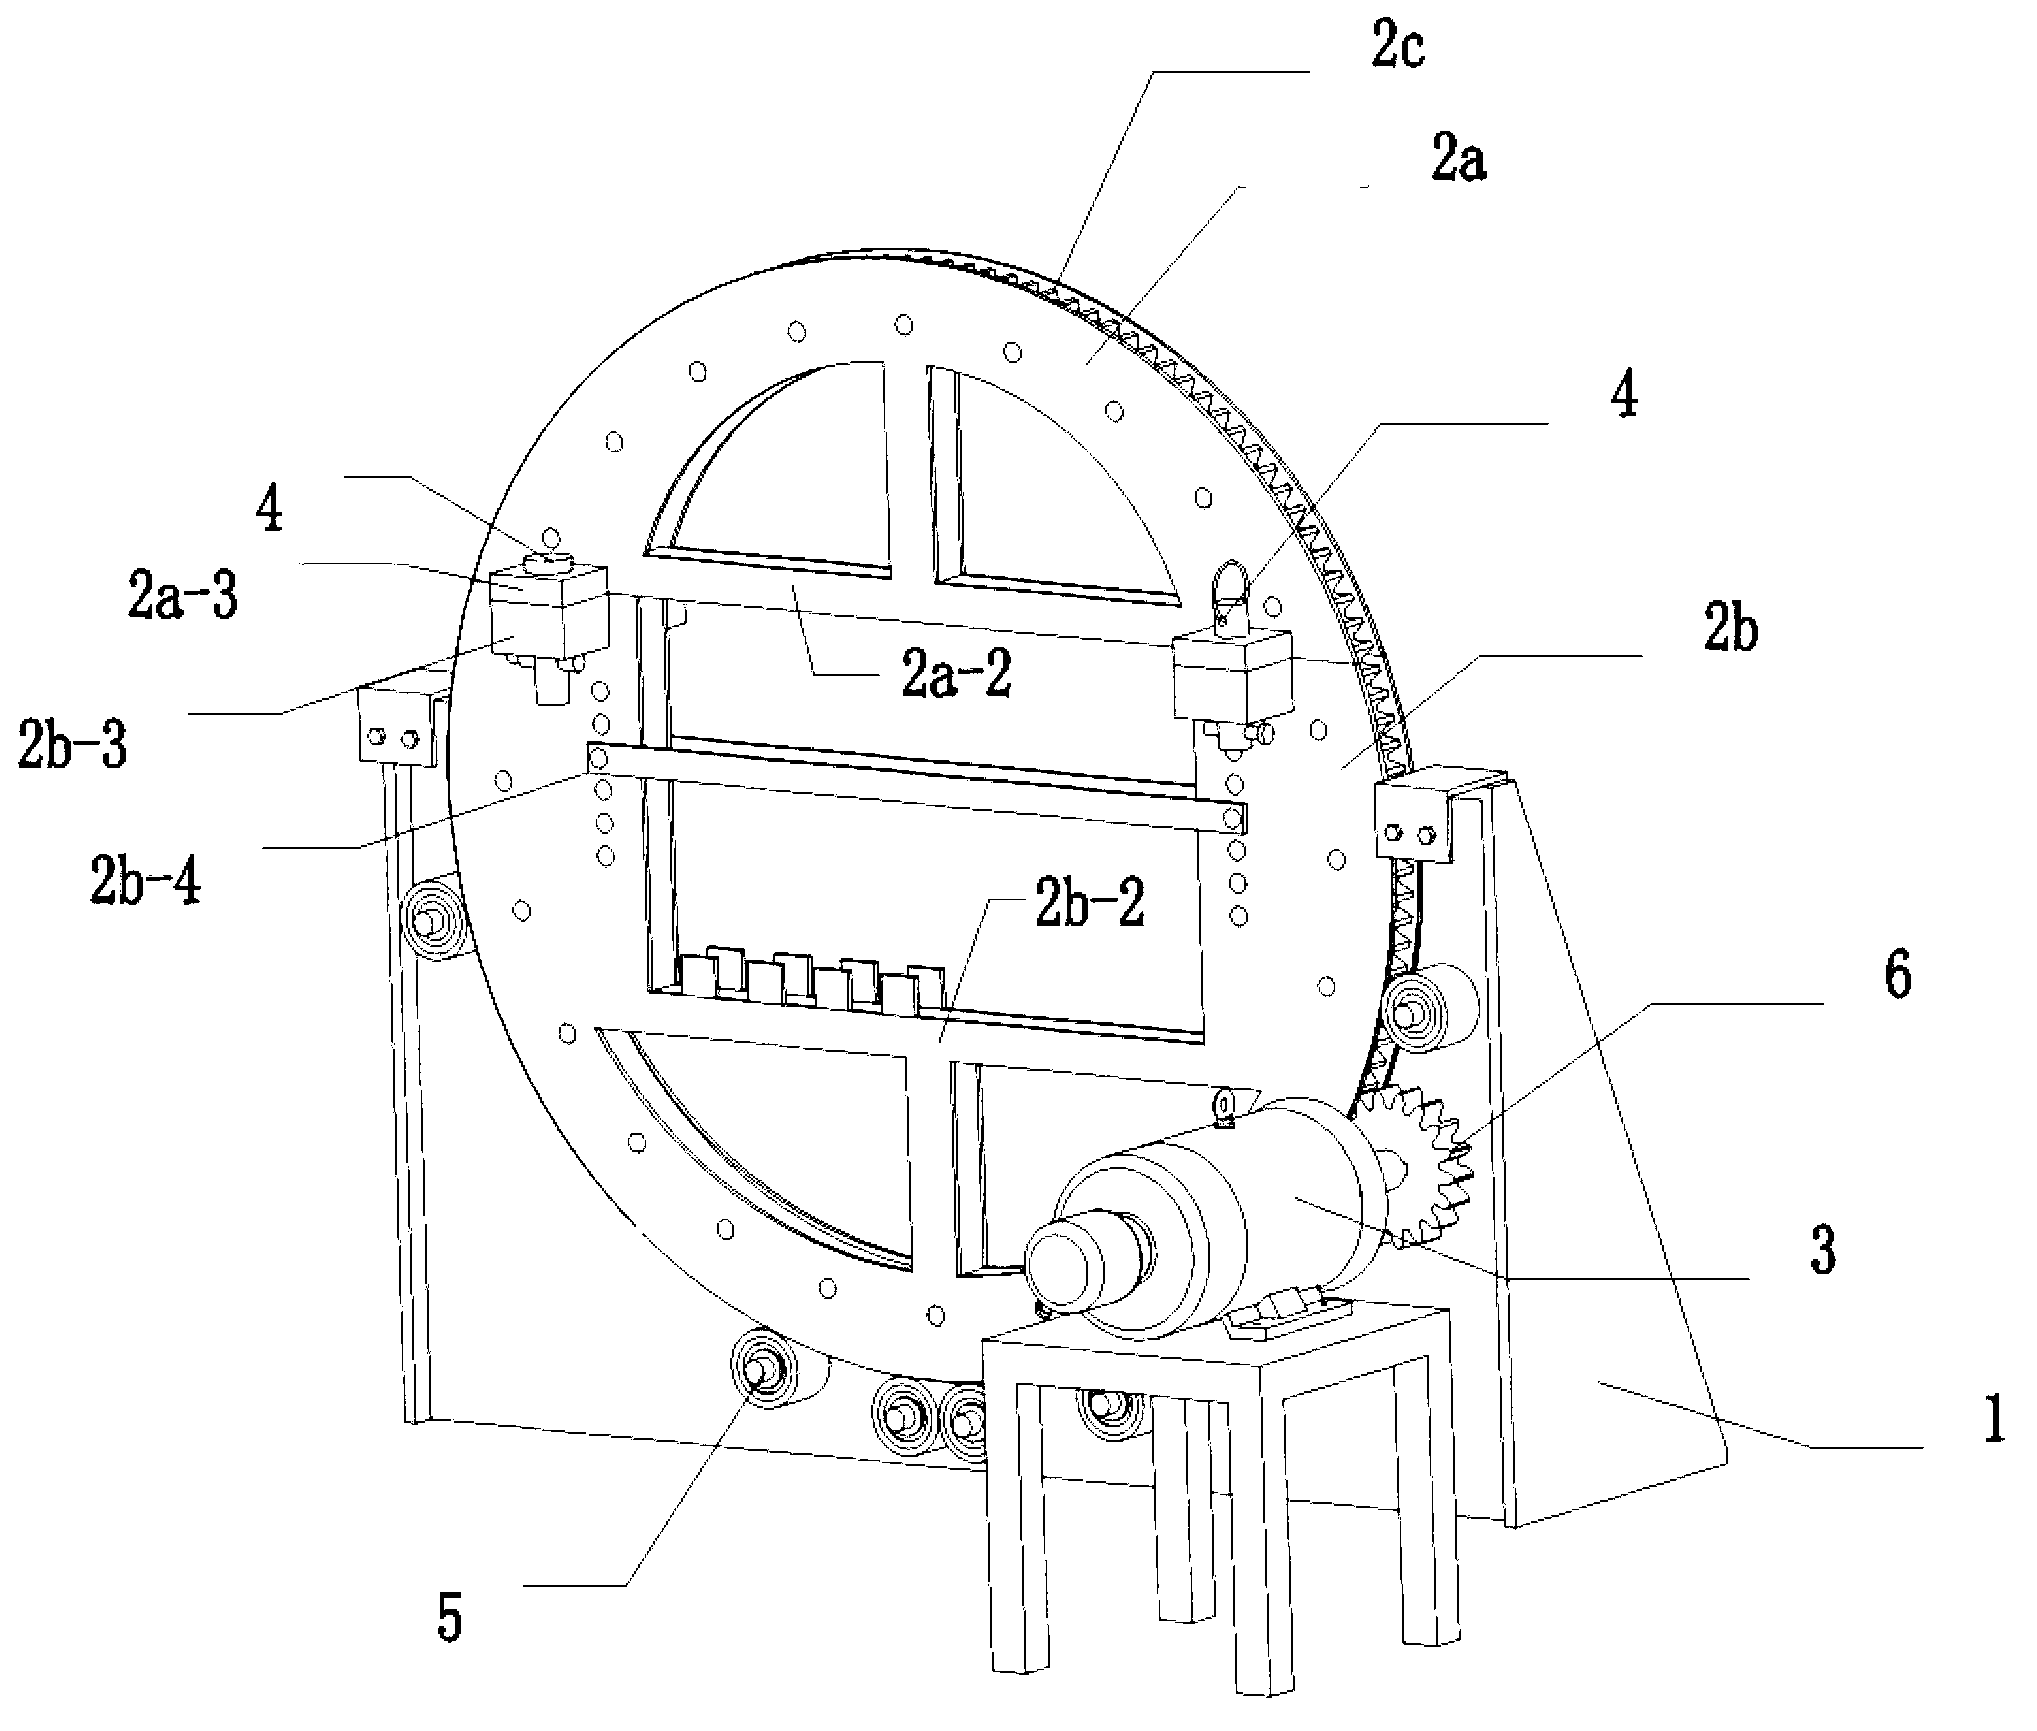 H-shaped steel turning device